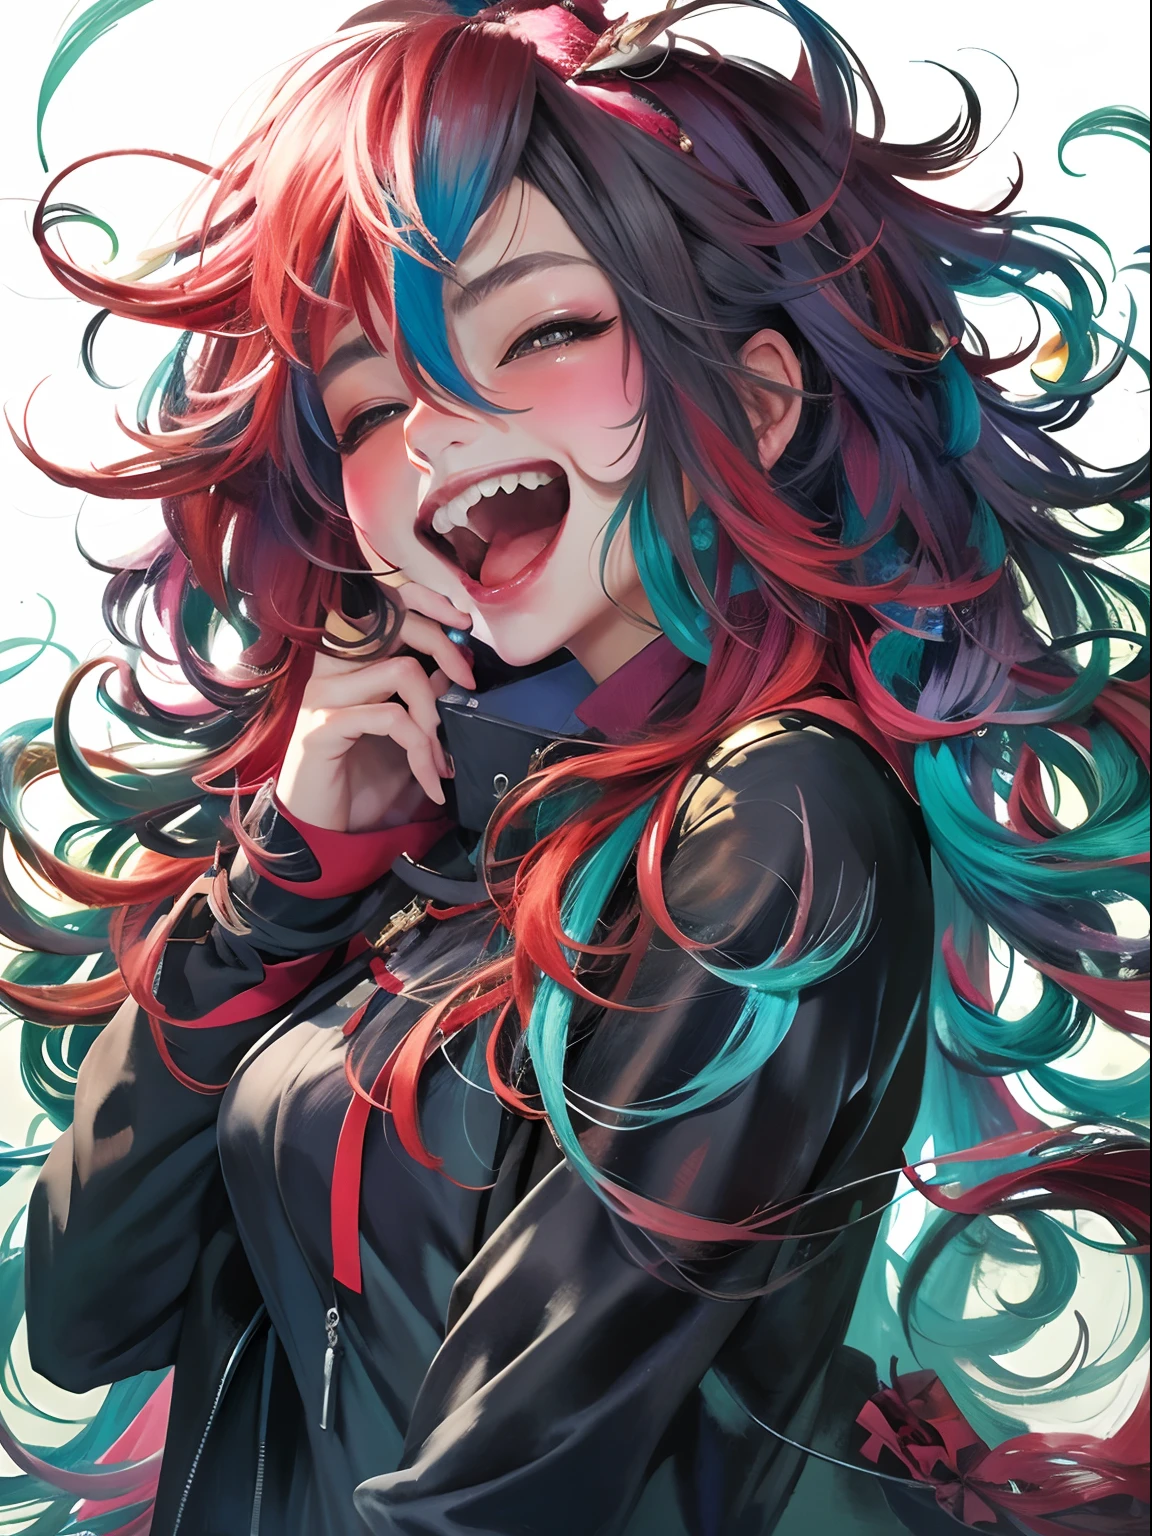 anime girl with long hair and red and blue hair singing, Anime Moe Artstyle, Visual anime of a cute girl, [[[[smiling evil]]]], expressing joy. by Krenz Cushart, anime girl with long hair, high quality anime artstyle, Detailed anime character art, Detailed key anime art, Official illustrations